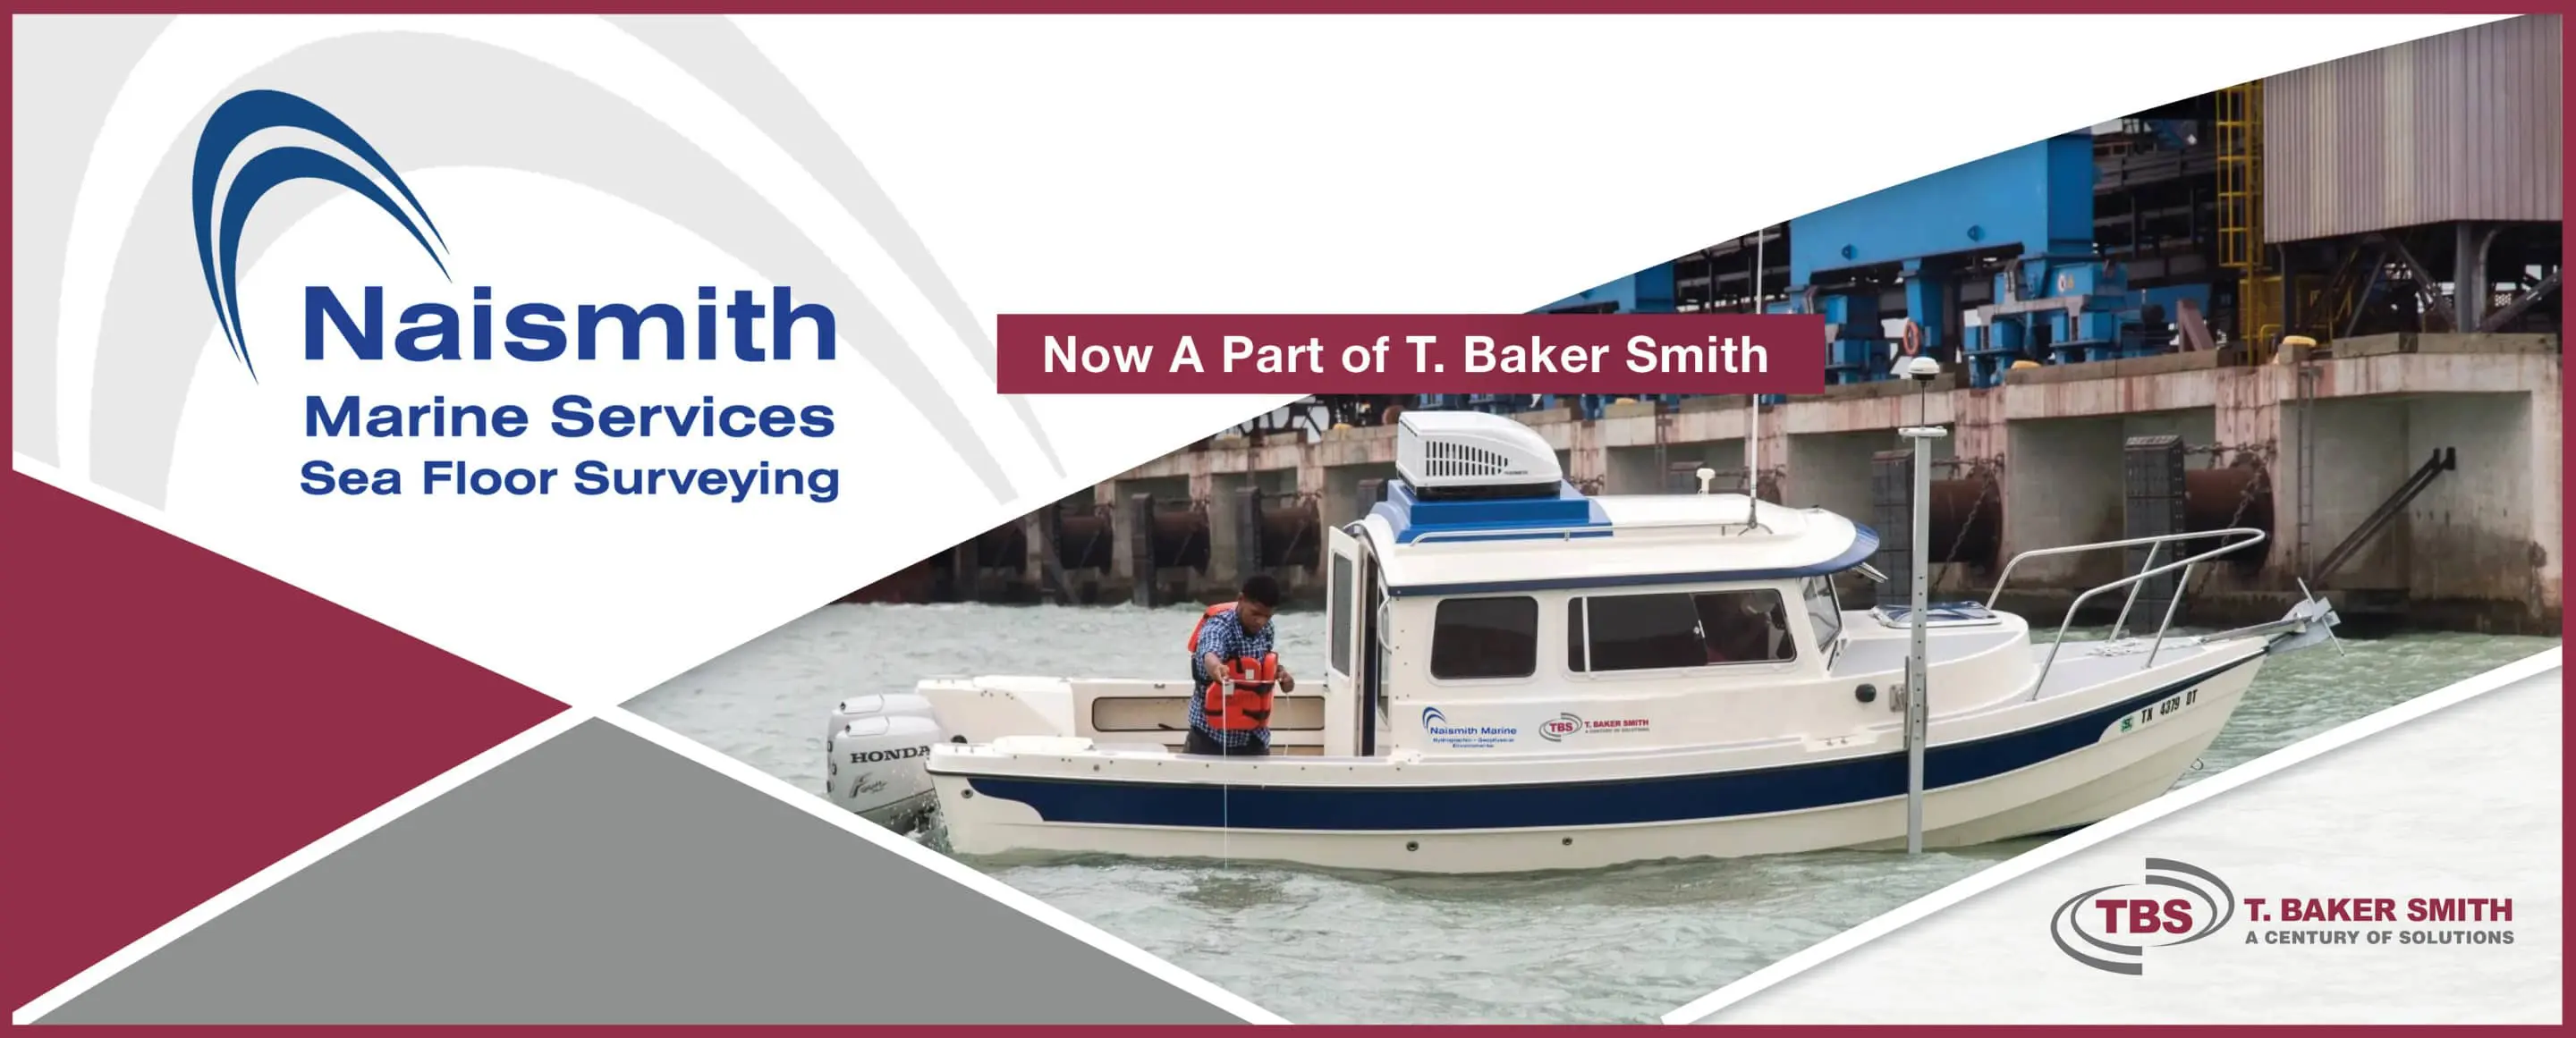 T. Baker Smith Acquires Naismith